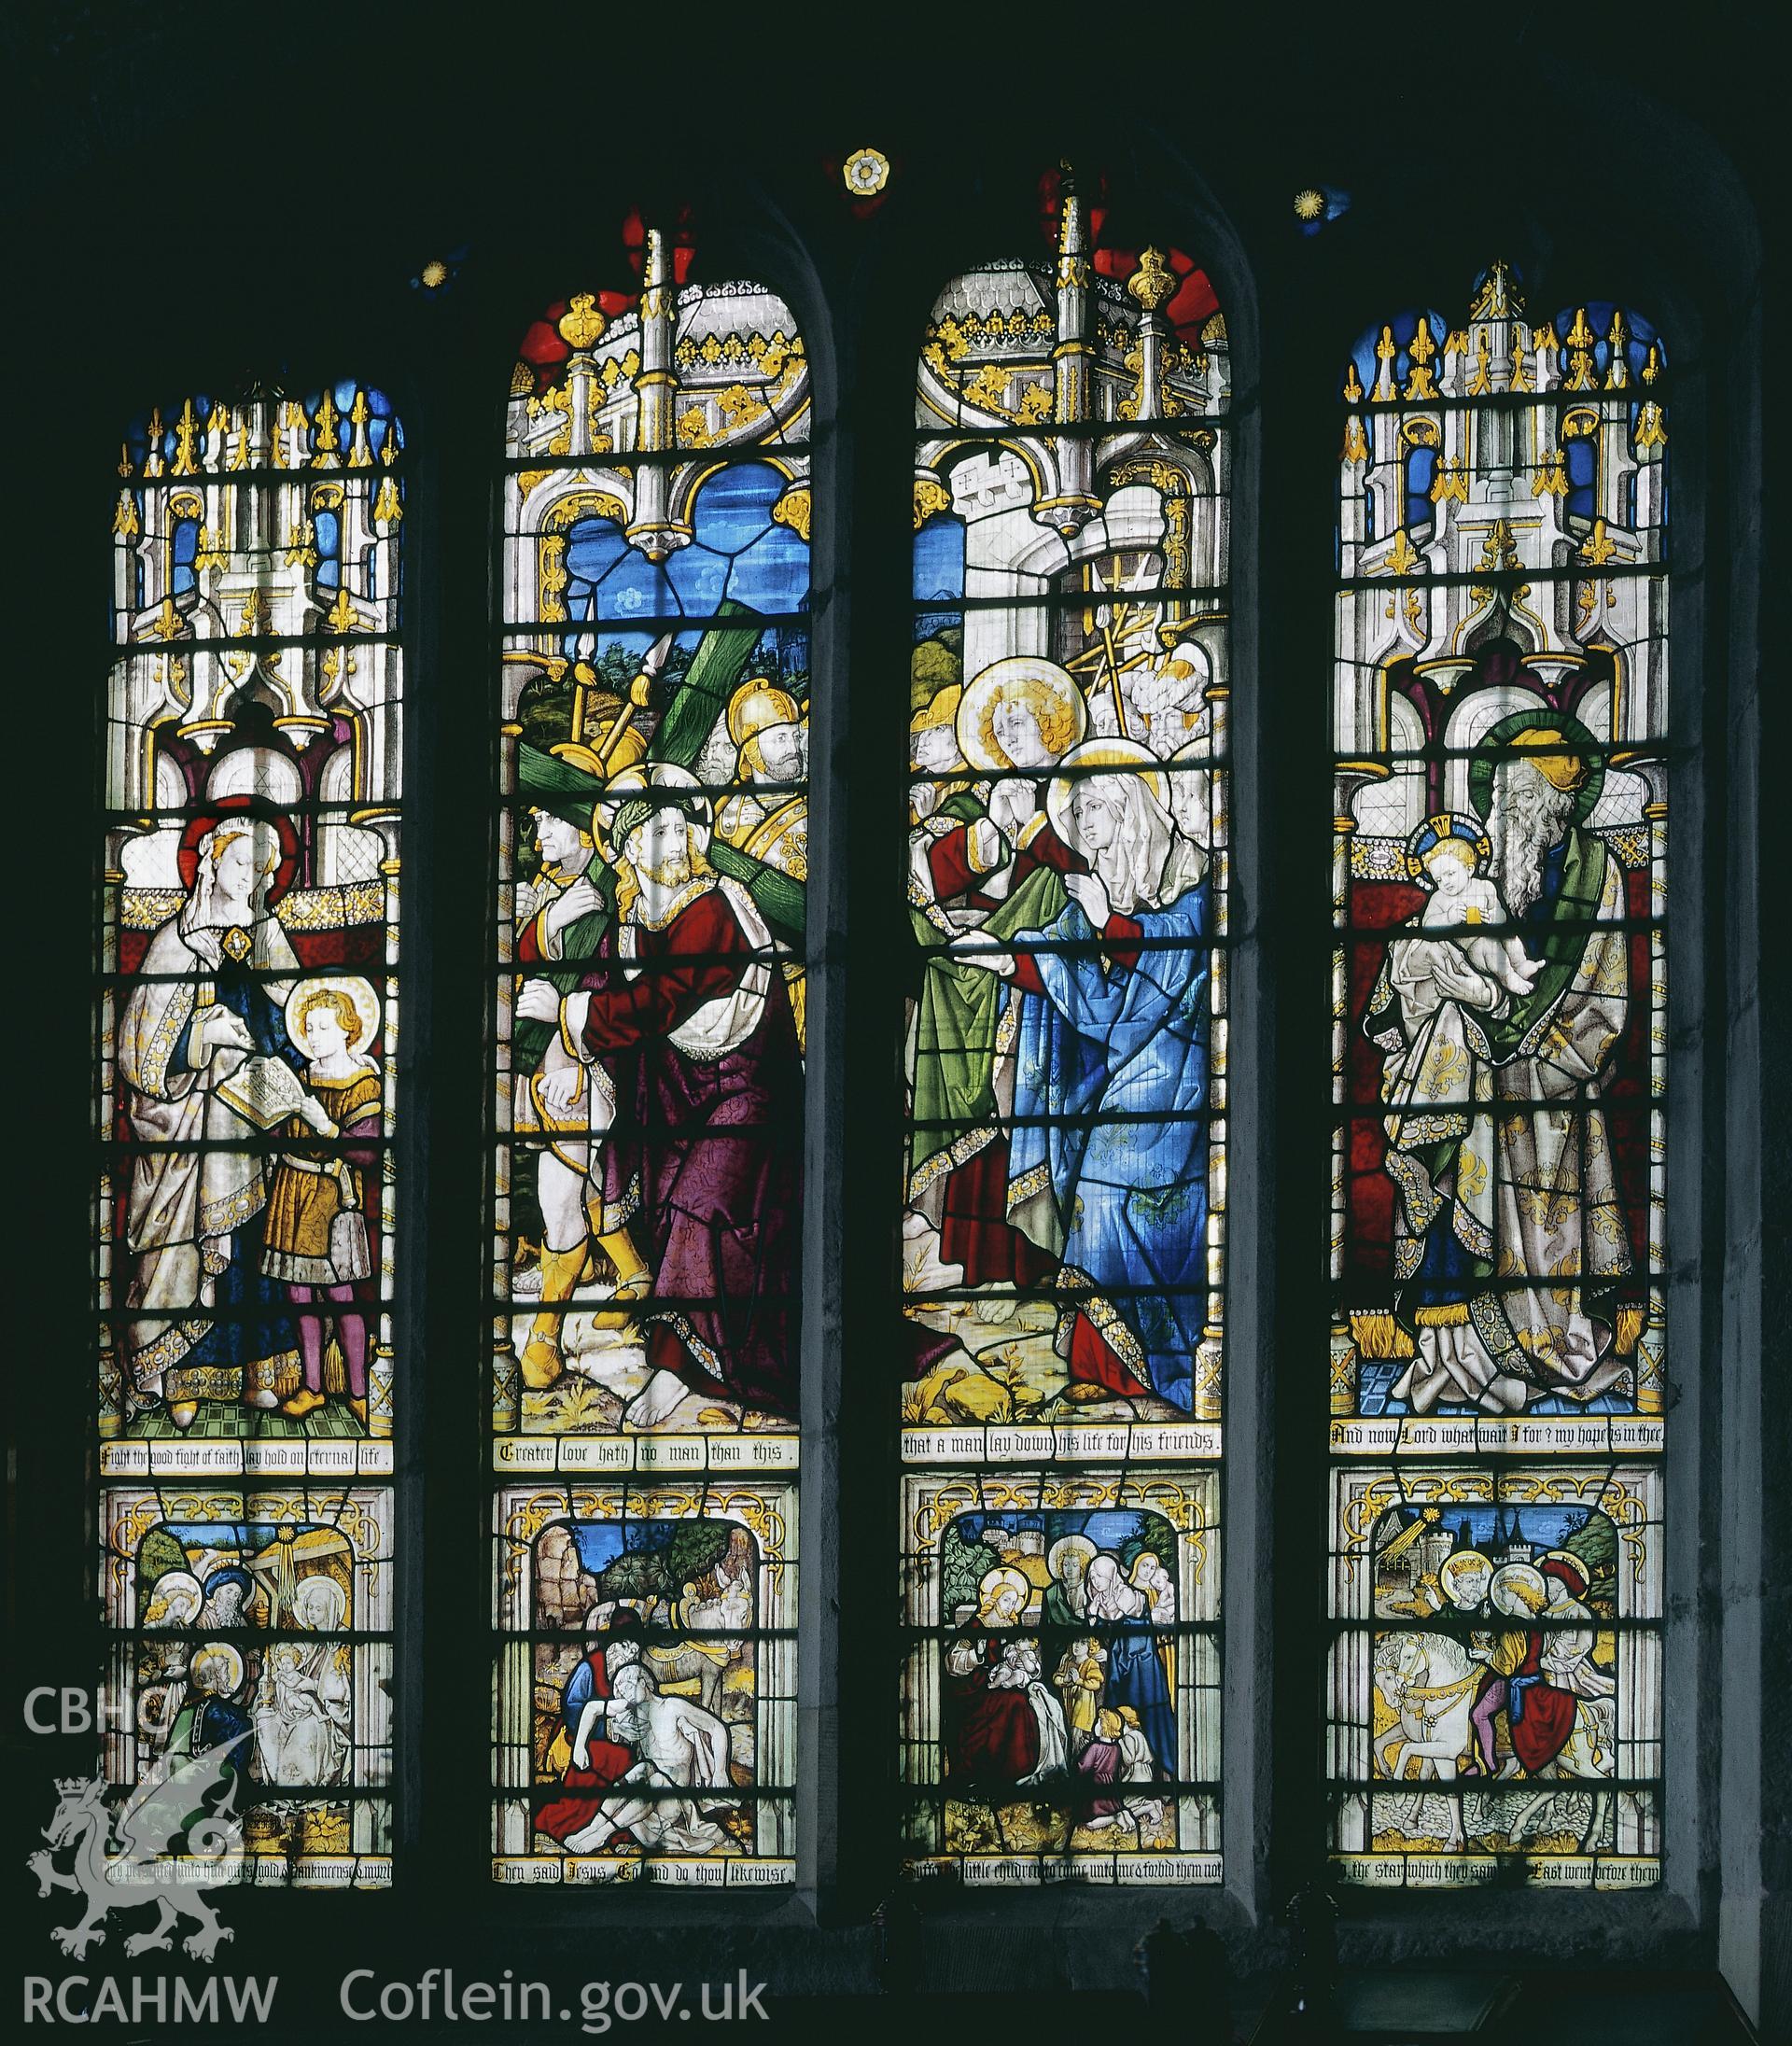 RCAHMW colour transparency of a stained glass window depicting the crucifiction as the centre panel  in St. Dyfnog's Church, Llanrhaeadr-yng-Nghinmeirch, by Fleur James, 1986.